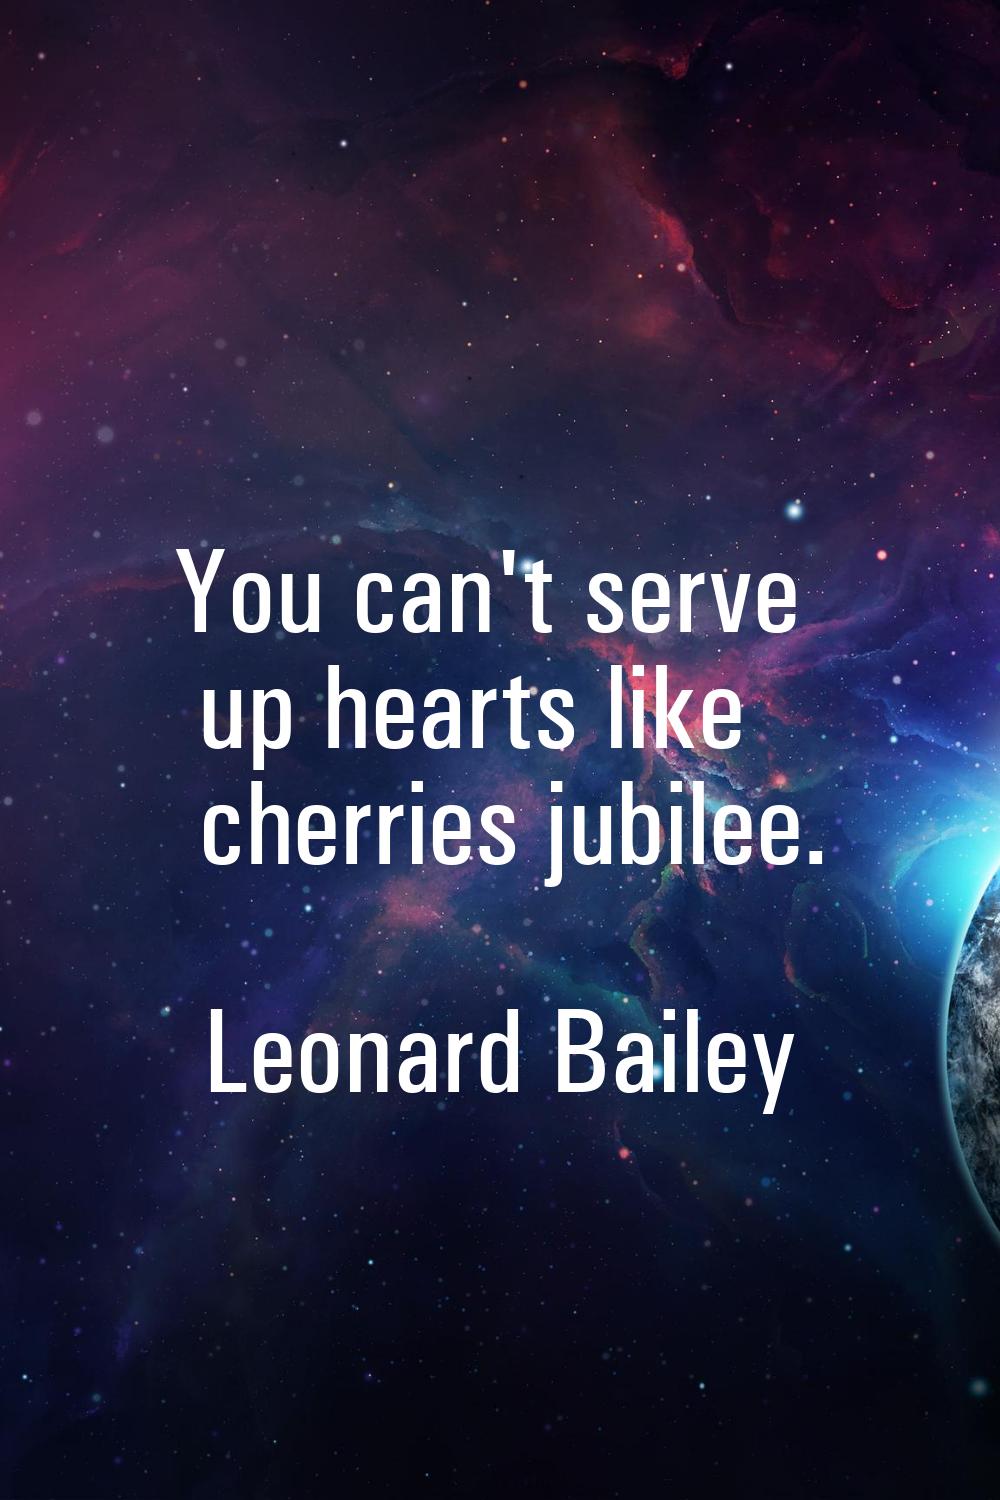 You can't serve up hearts like cherries jubilee.